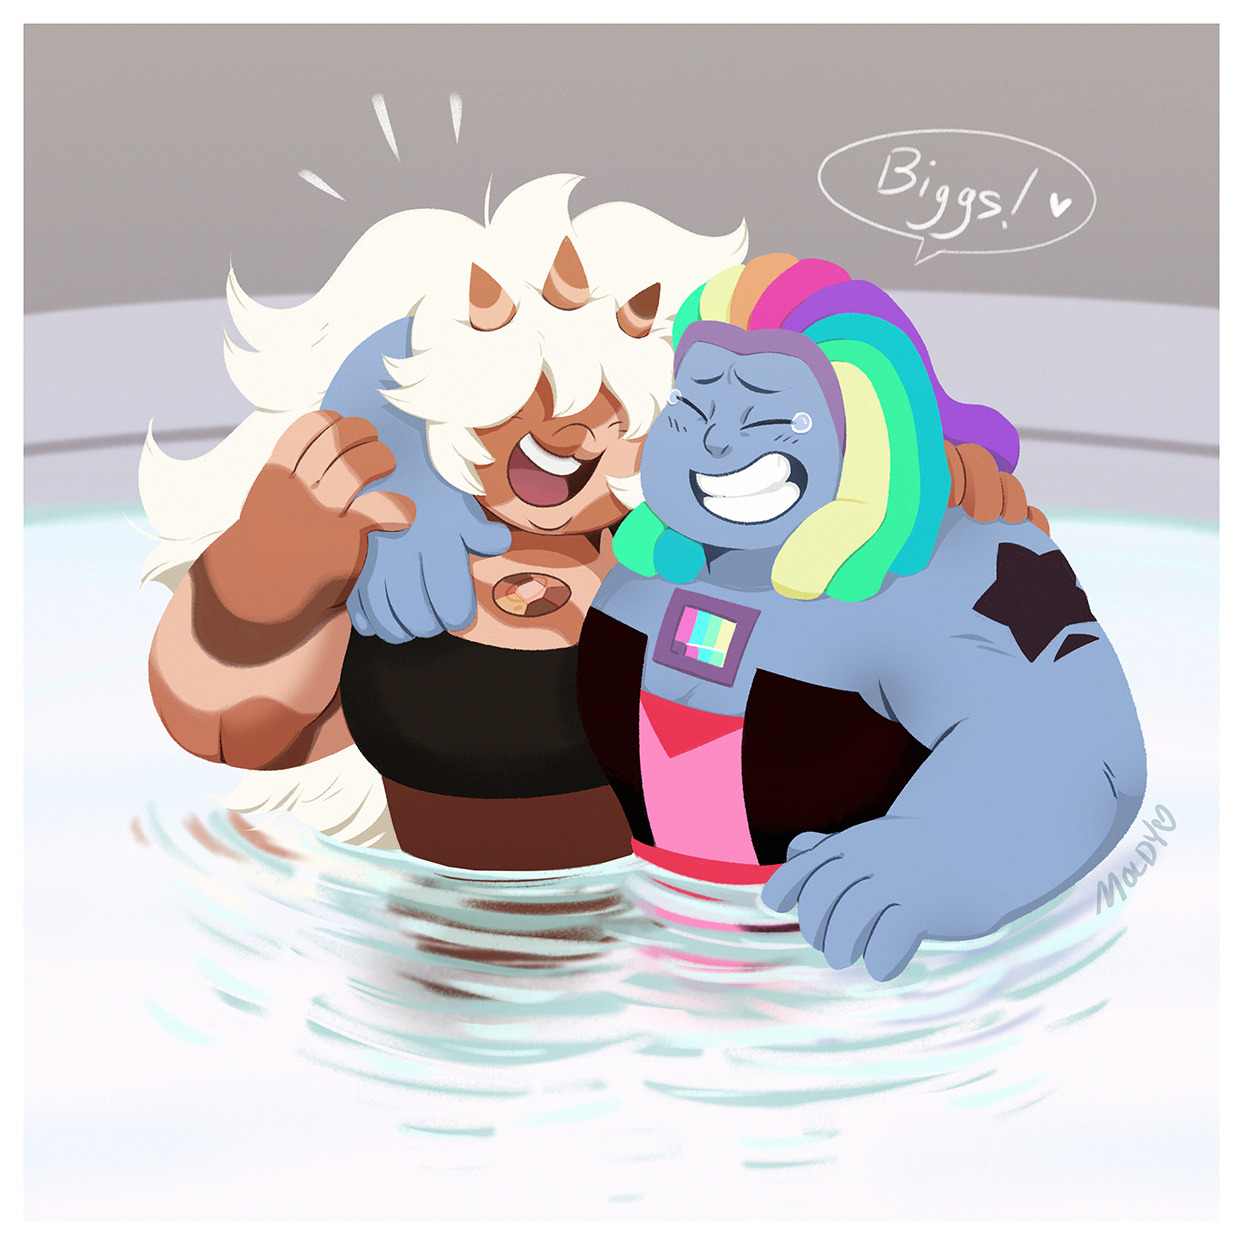 Tried out a lineless style for Bismuth and Biggs, lemme know whatcha think :o